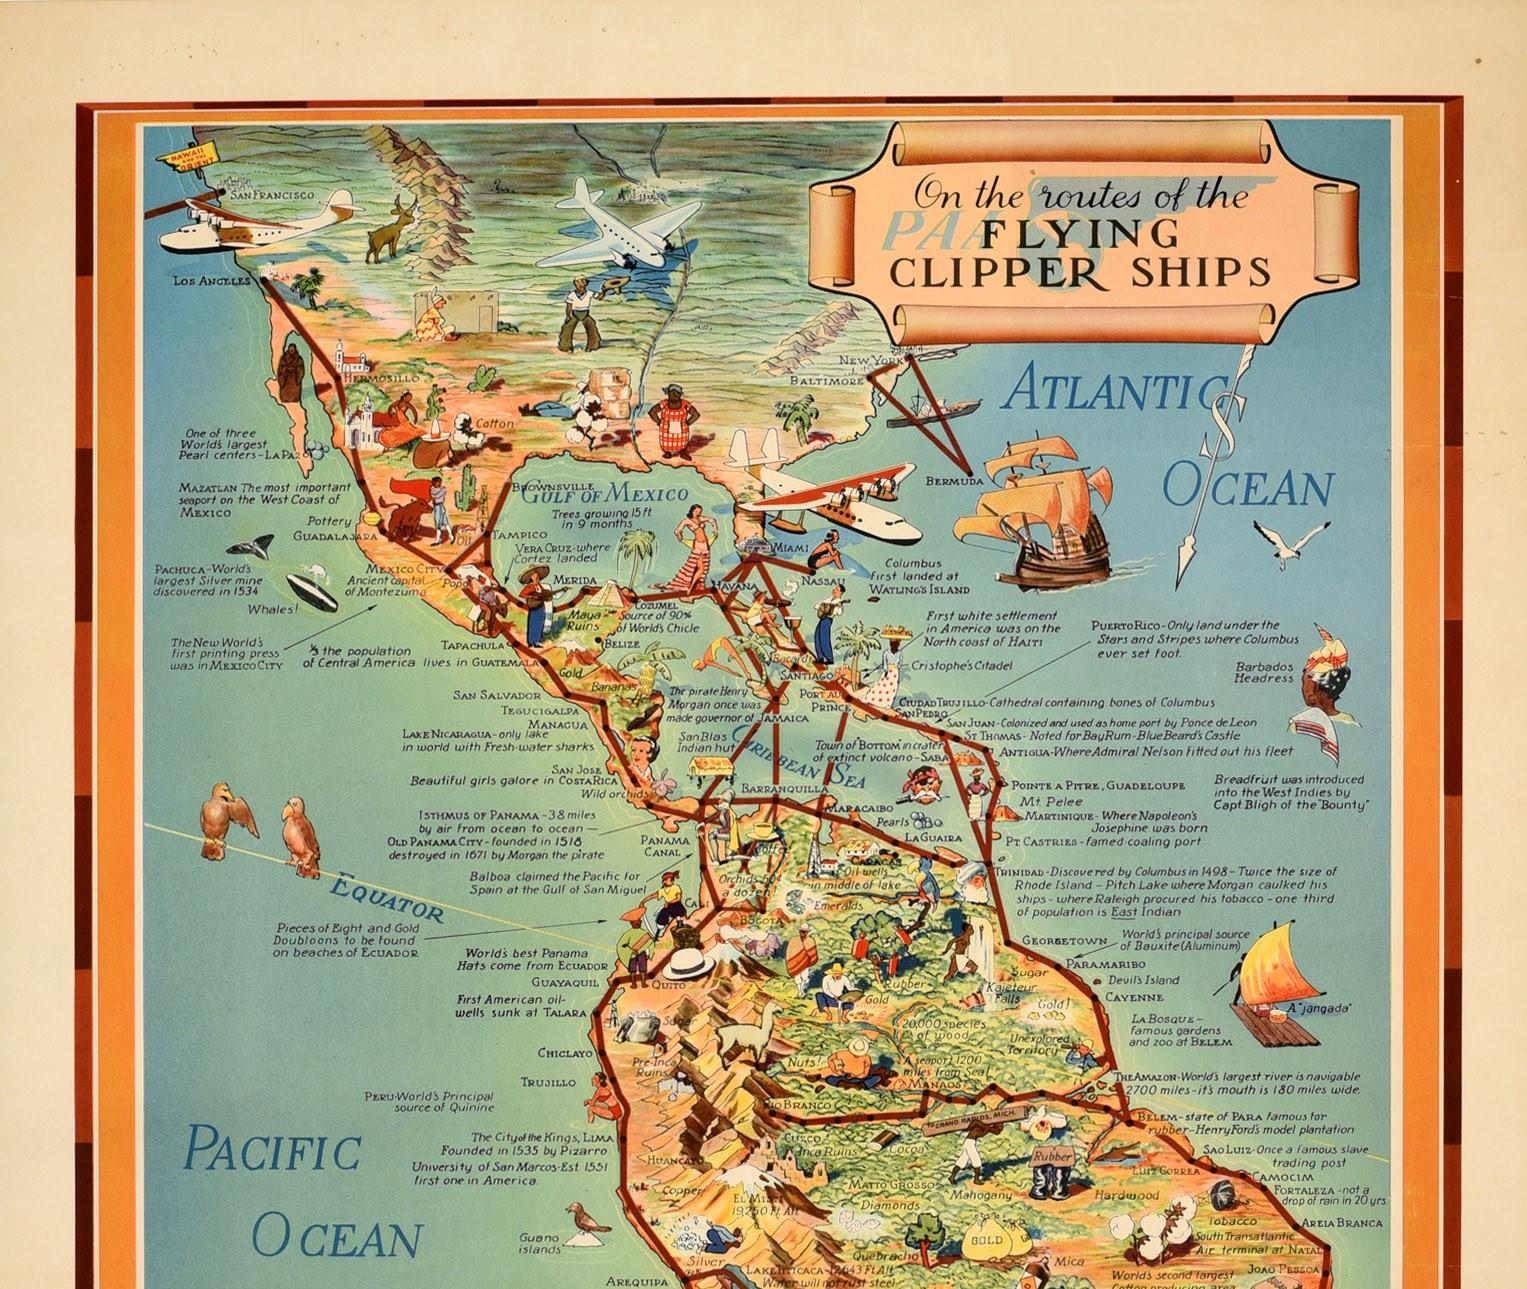 Original vintage Pan Am travel advertising map poster, on the routes of the Flying Clipper Ships, featuring a pictorial map by Kenneth W. Thompson (1907-1996) of Latin America with images of points of interest, cities, animals and people including